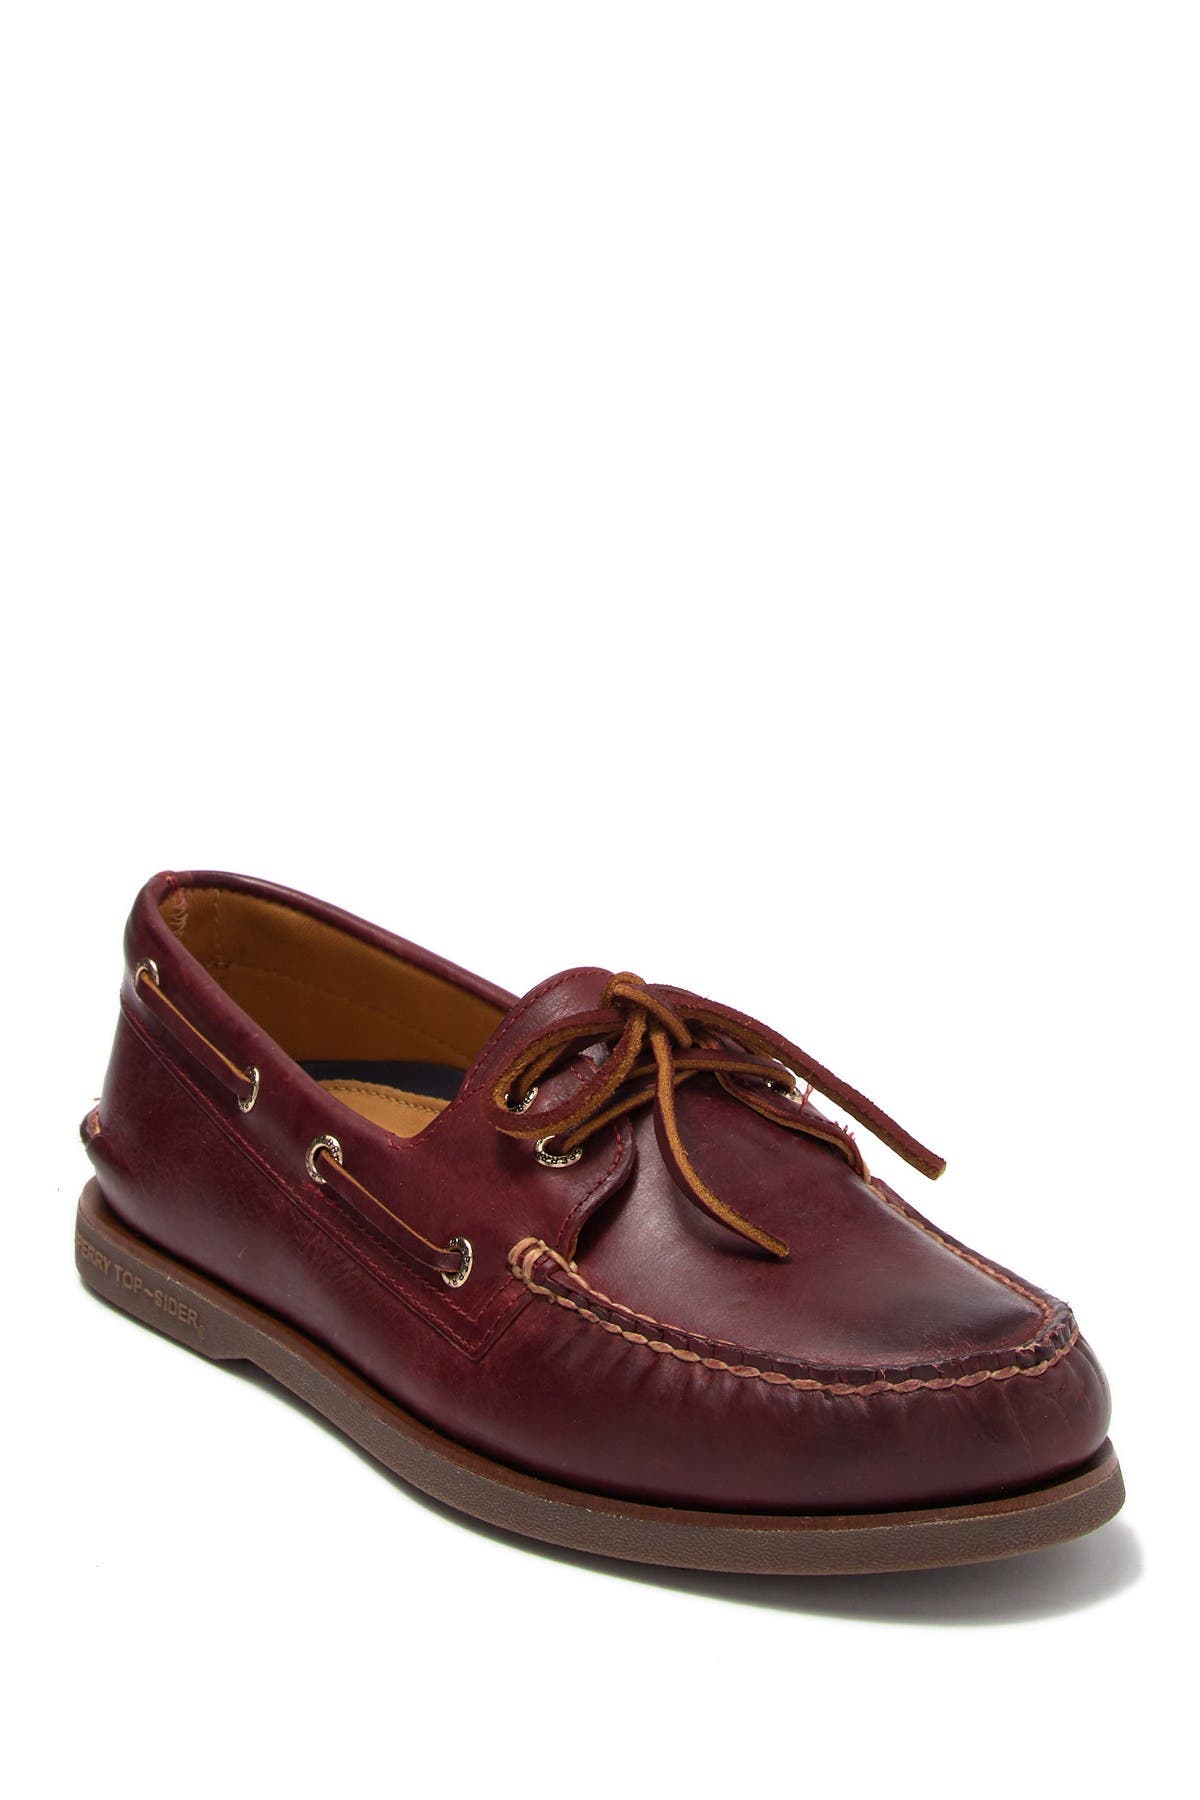 sperry gold cup ao boat shoe